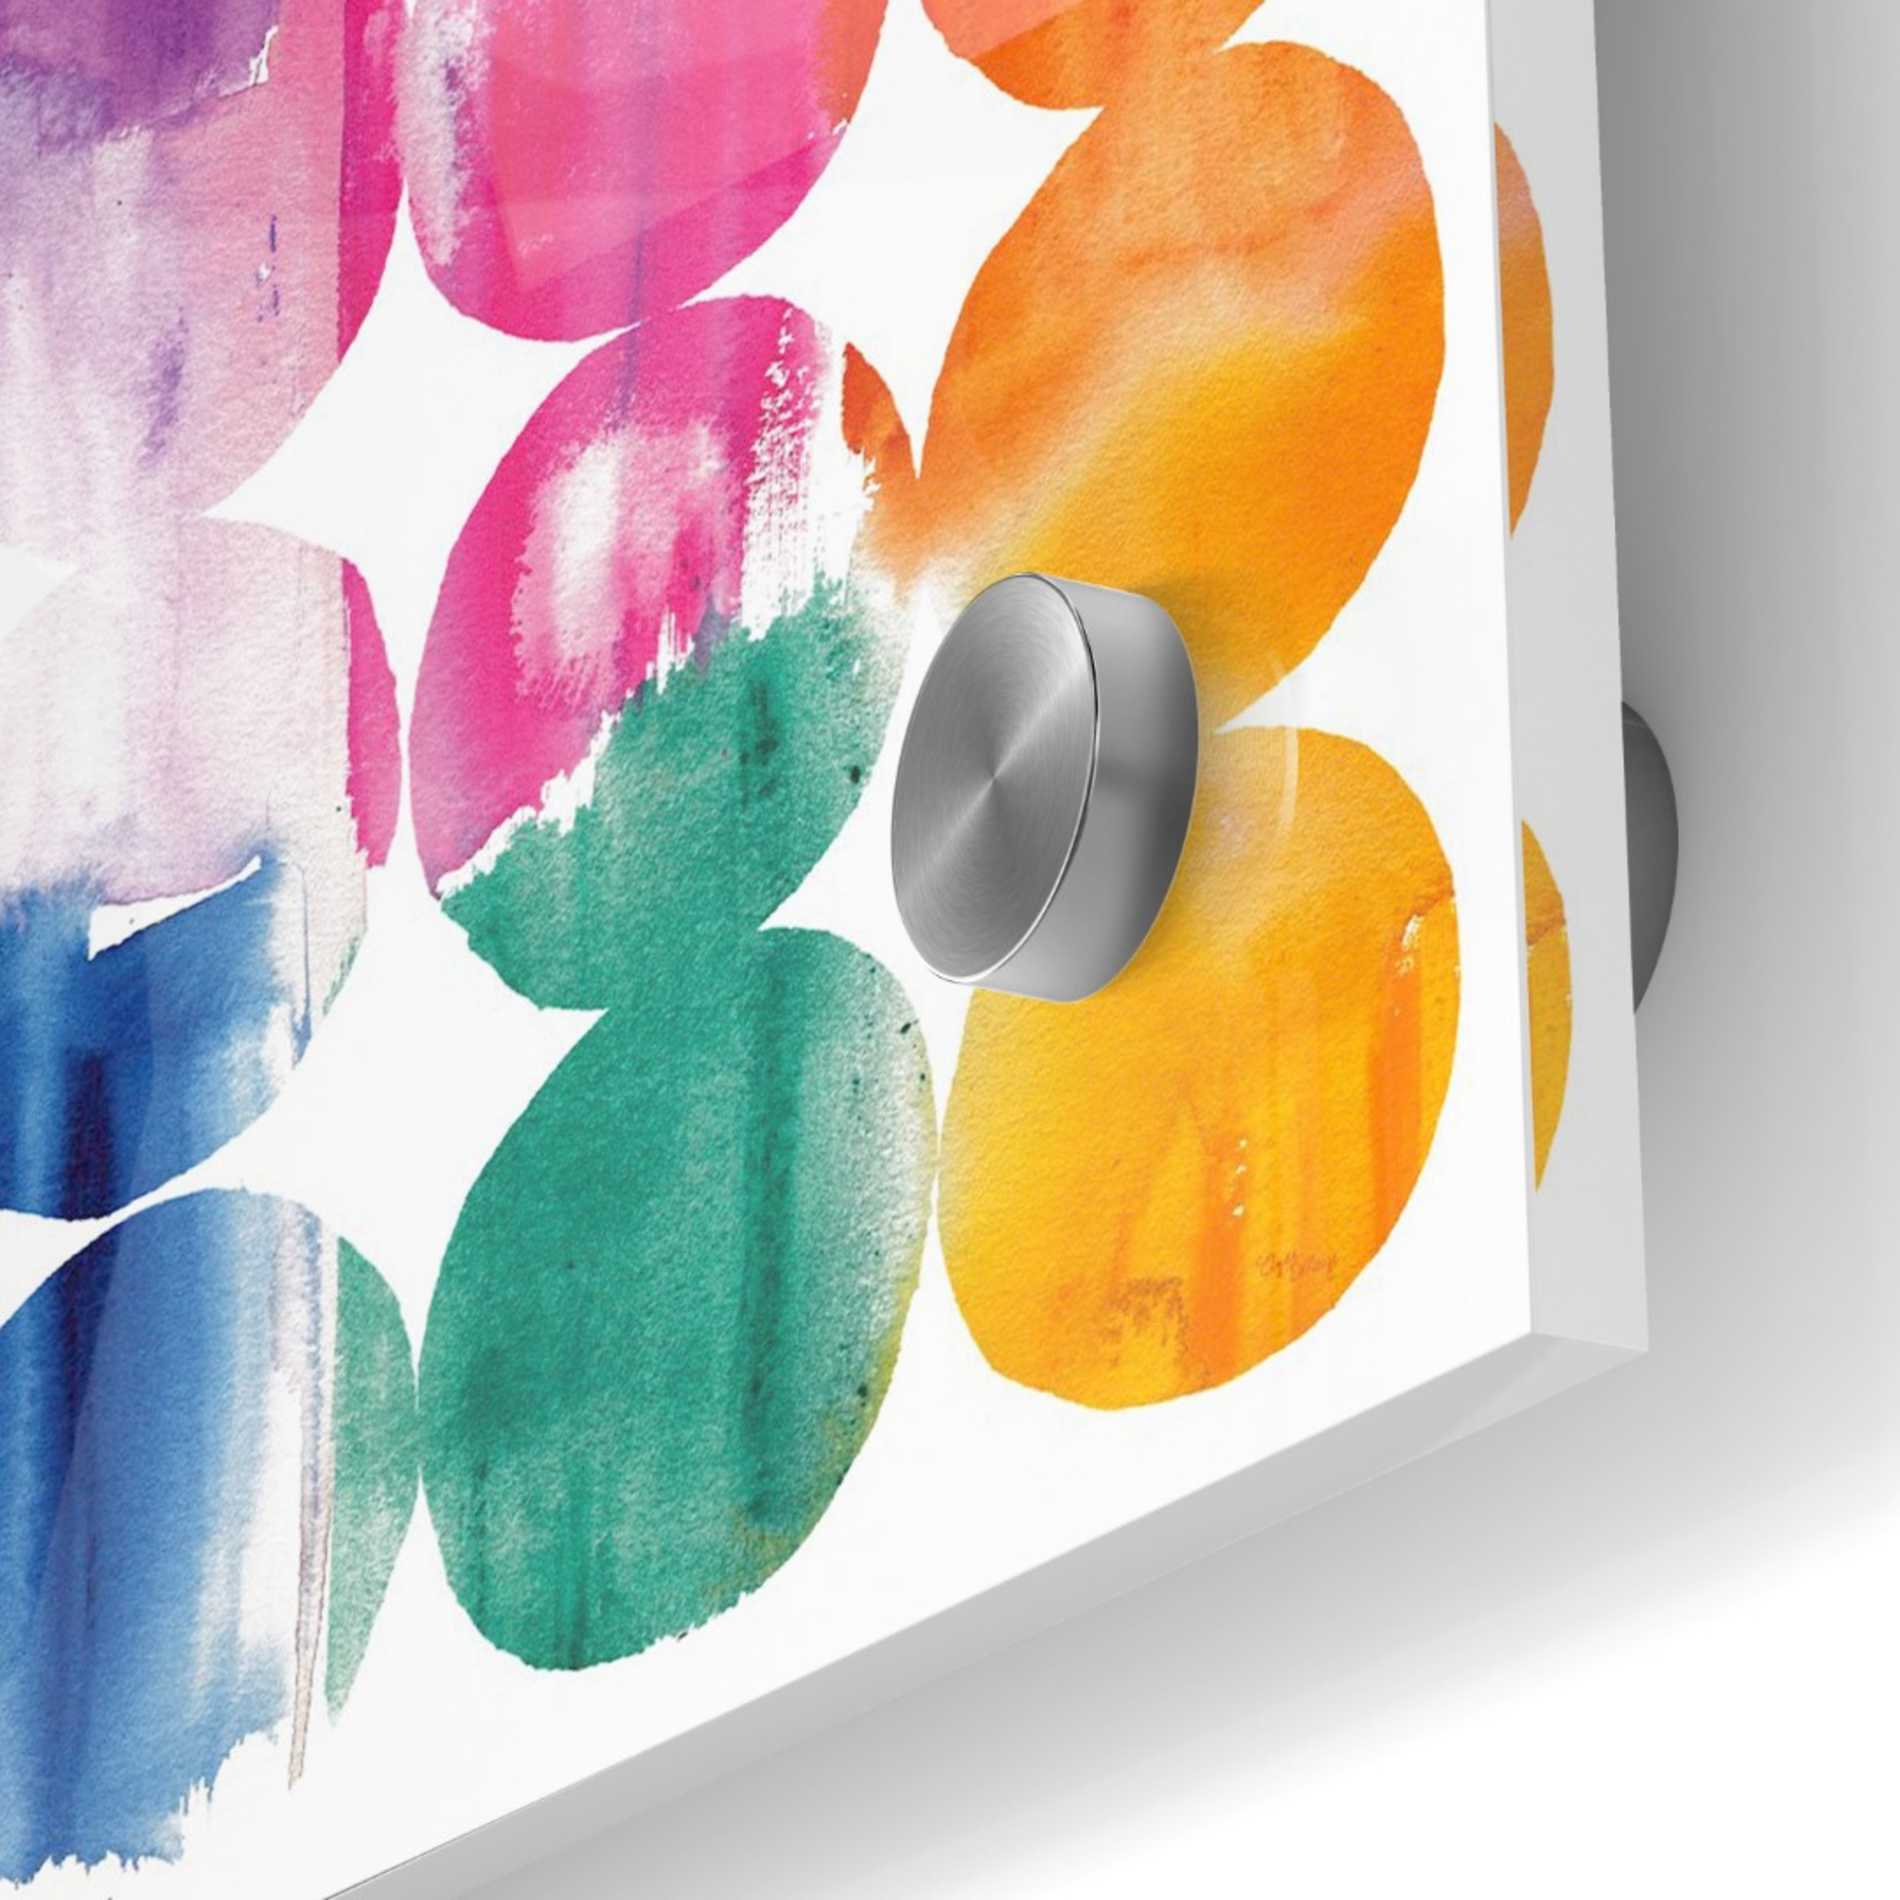 Epic Art 'Spring Dots Crop with White Border' by Elyse DeNeige, Acrylic Glass Wall Art,24x24